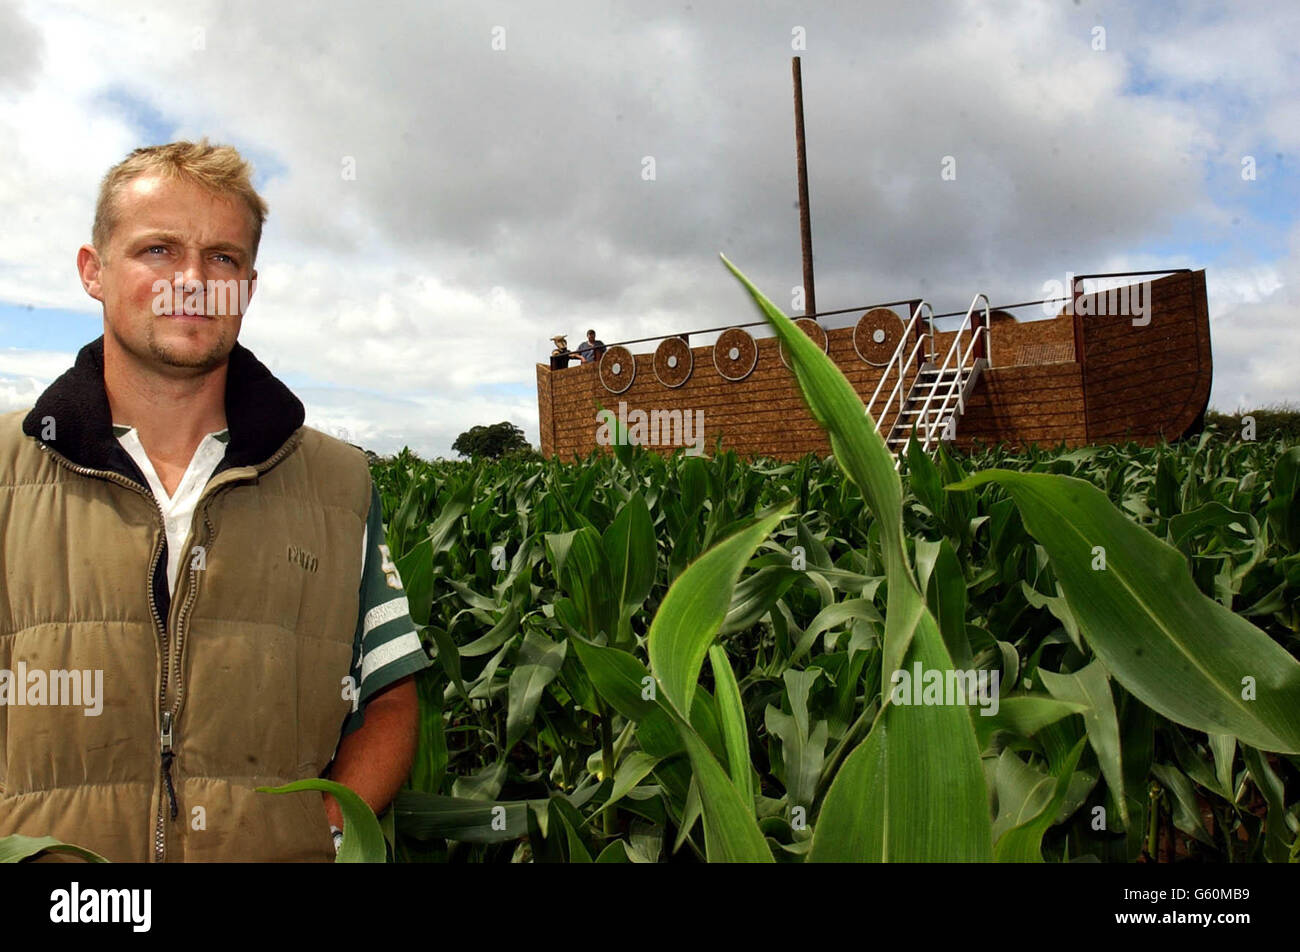 Farmer Tony Pearcy in one of Britain's biggest ever 'maize mazes' - a massive 20 acre Viking long ship design.The maze was planted and cut by Mr Pearcy, 31, on his 450 acre farm at Heslington, near York, and celebrates the city's Nordic heritage. * Mr Pearcy said he decided to grow the huge puzzle following the downturn in traditional farming and says he was inspired by giant crop circles. It is made of a million separate maize plants, which will soon be 10ft tall, with five miles of paths cut through them. The intricate Viking pattern is visible from the air and can also be made out from the Stock Photo